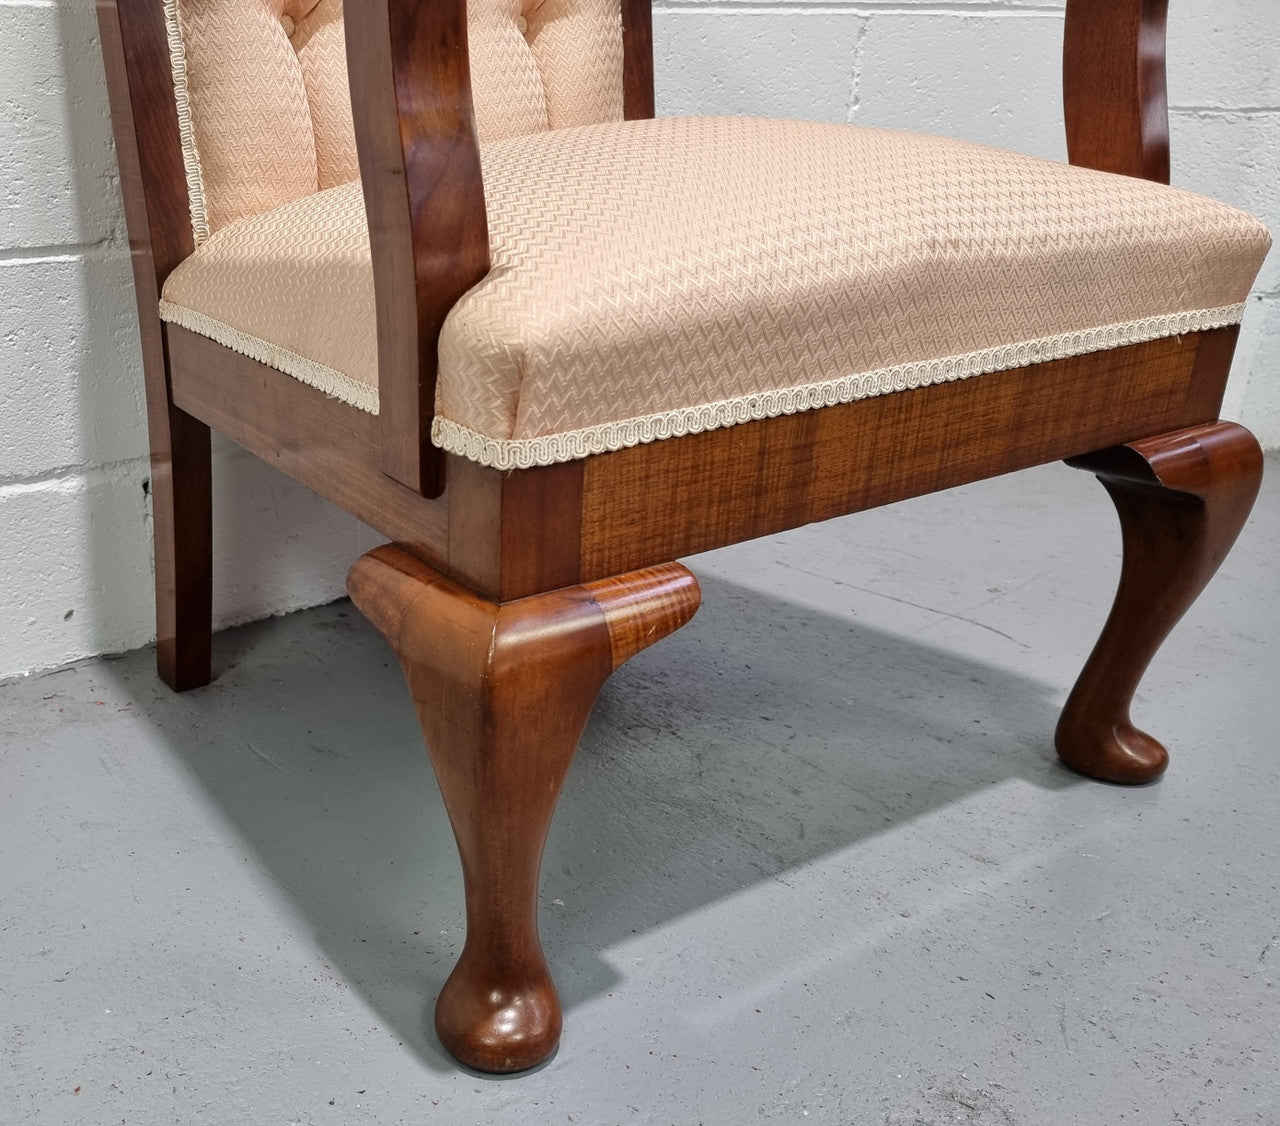 Australian Fiddleback Blackwood upholstered armchair with queen anne legs. In good original condition.